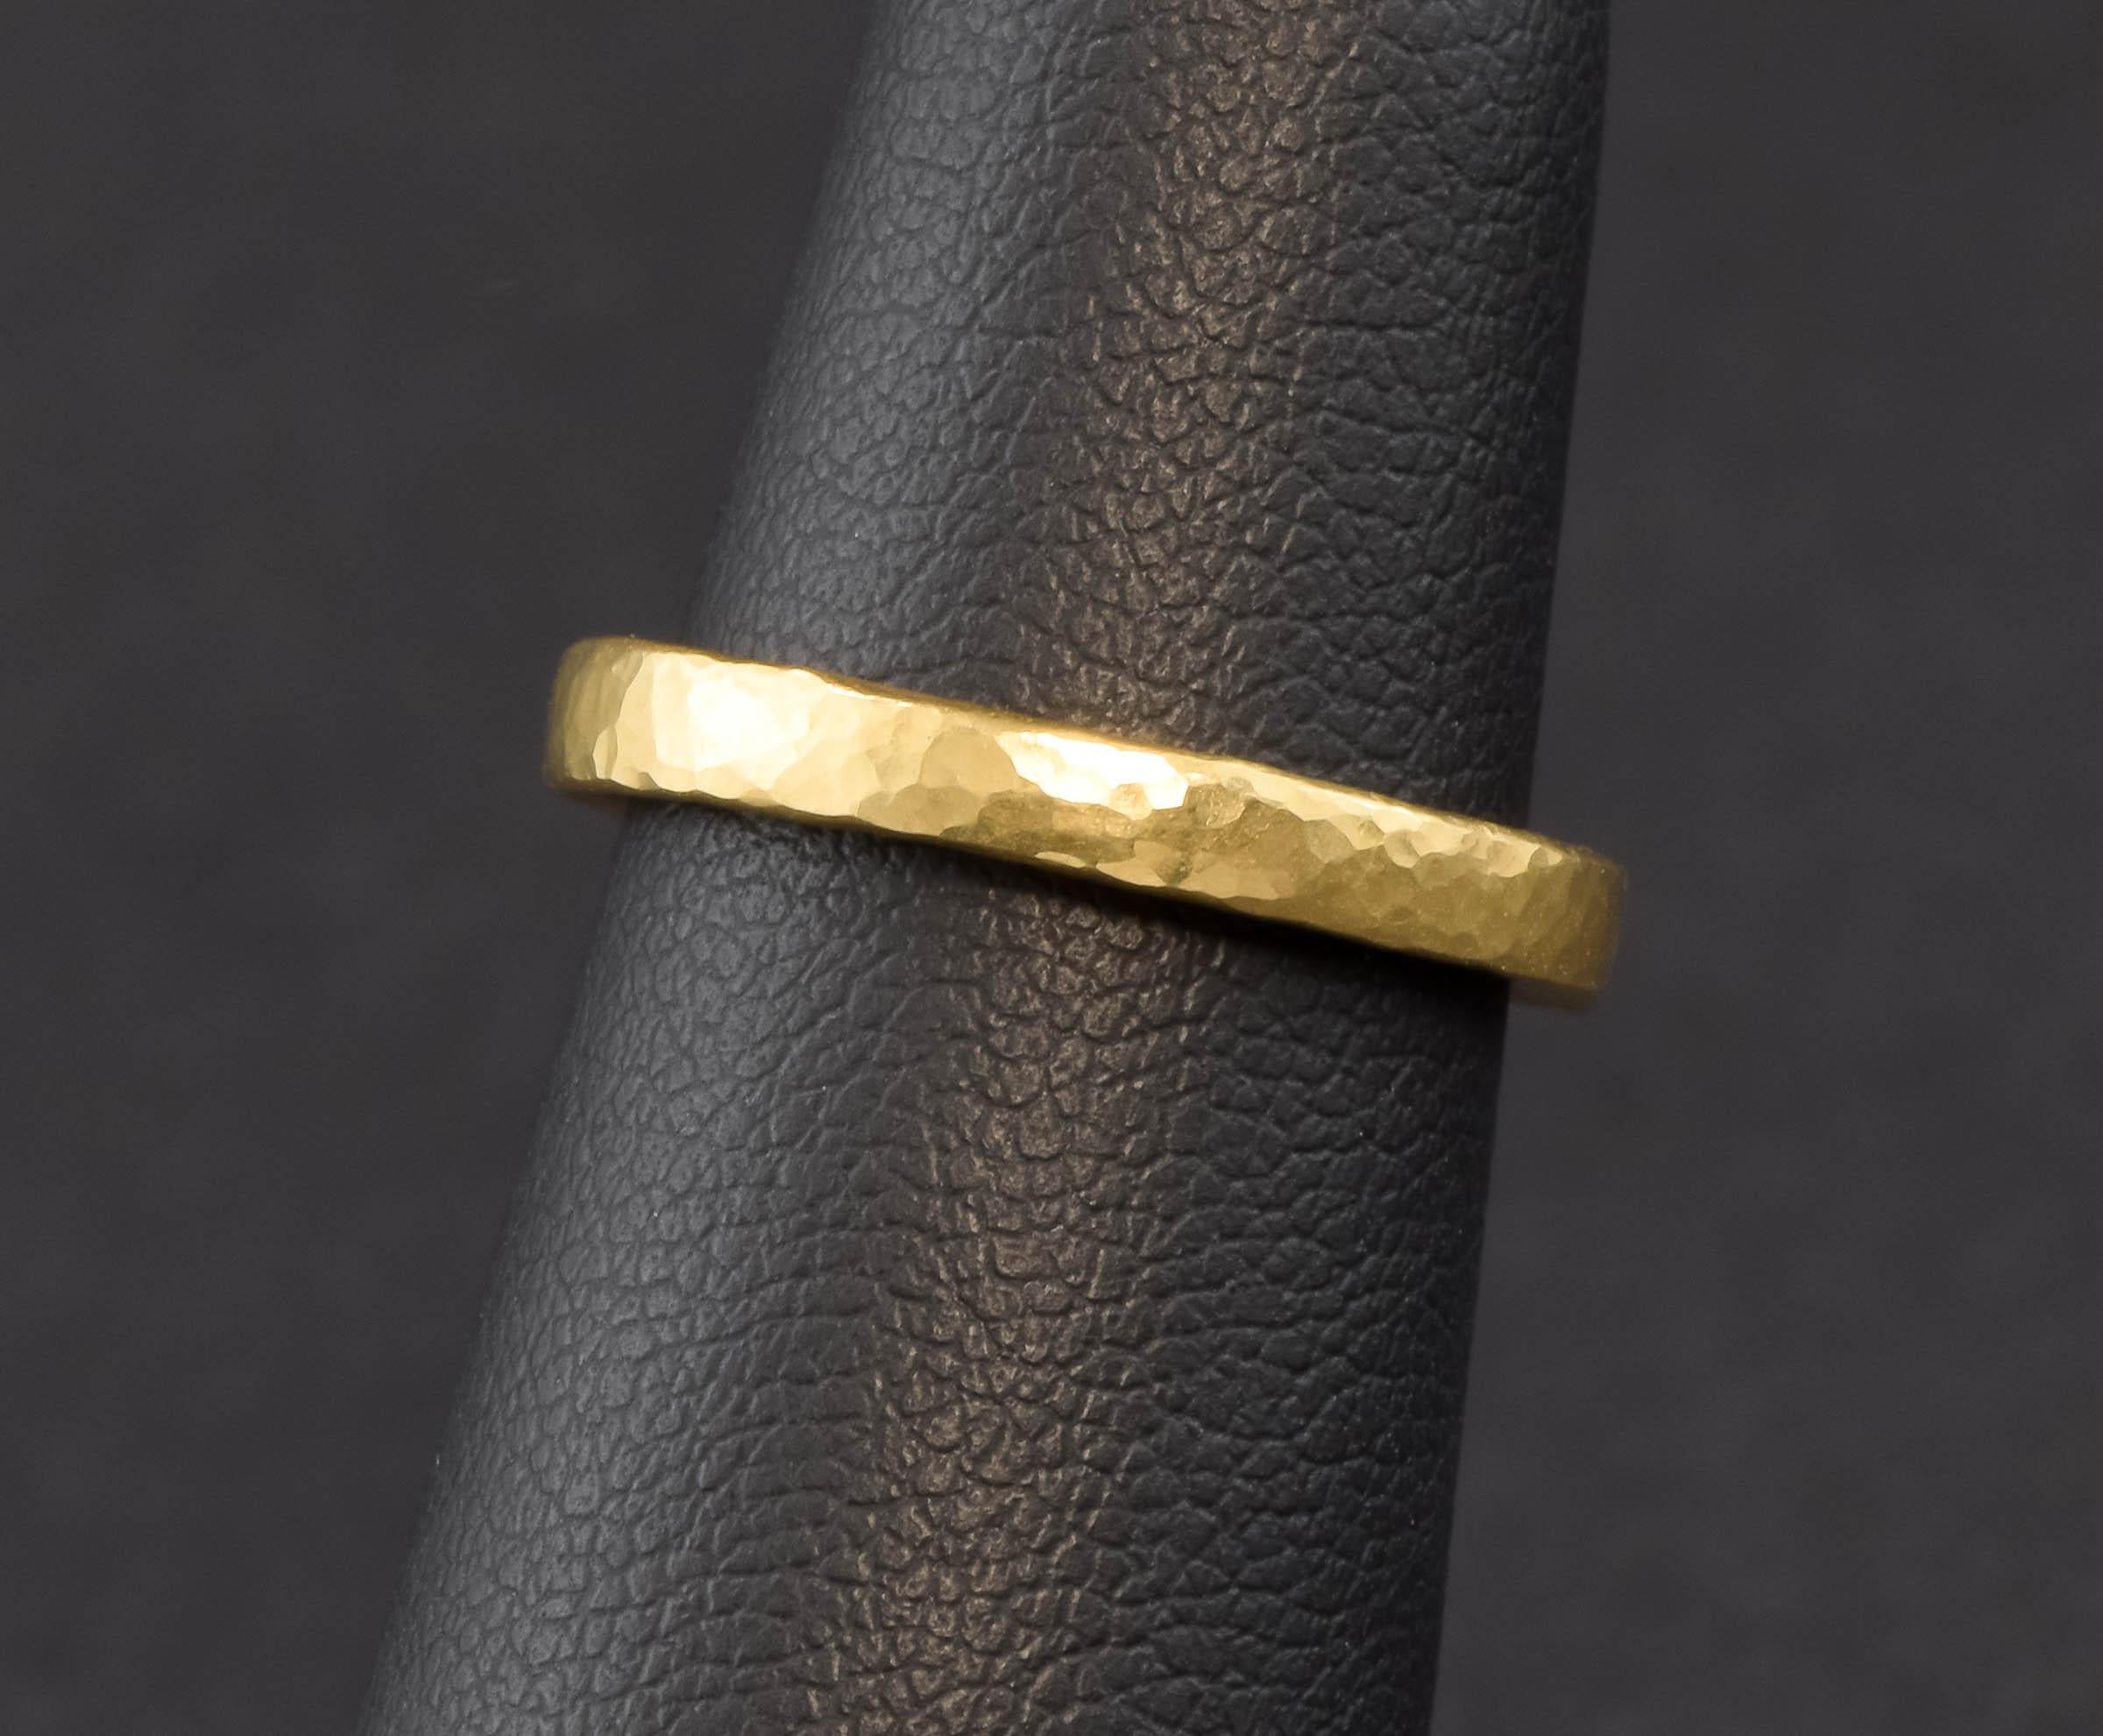 Luxury Hand Hammered 22K Gold Wedding Band or Stacking Ring In Good Condition For Sale In Danvers, MA